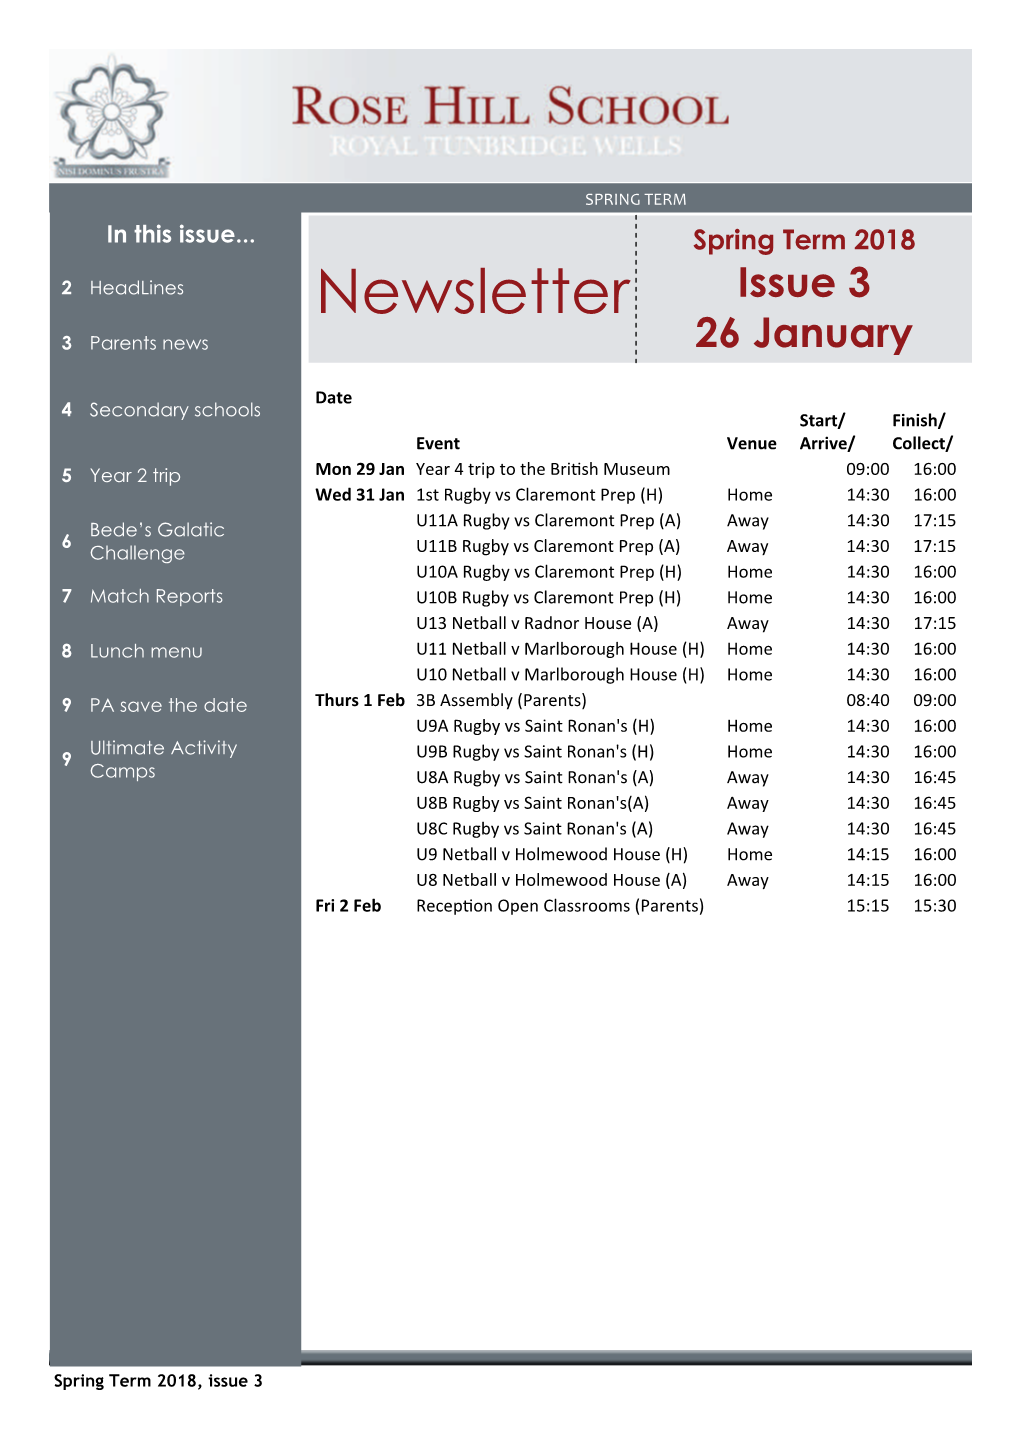 Newsletter Issue 3 3 Parents News 26 January